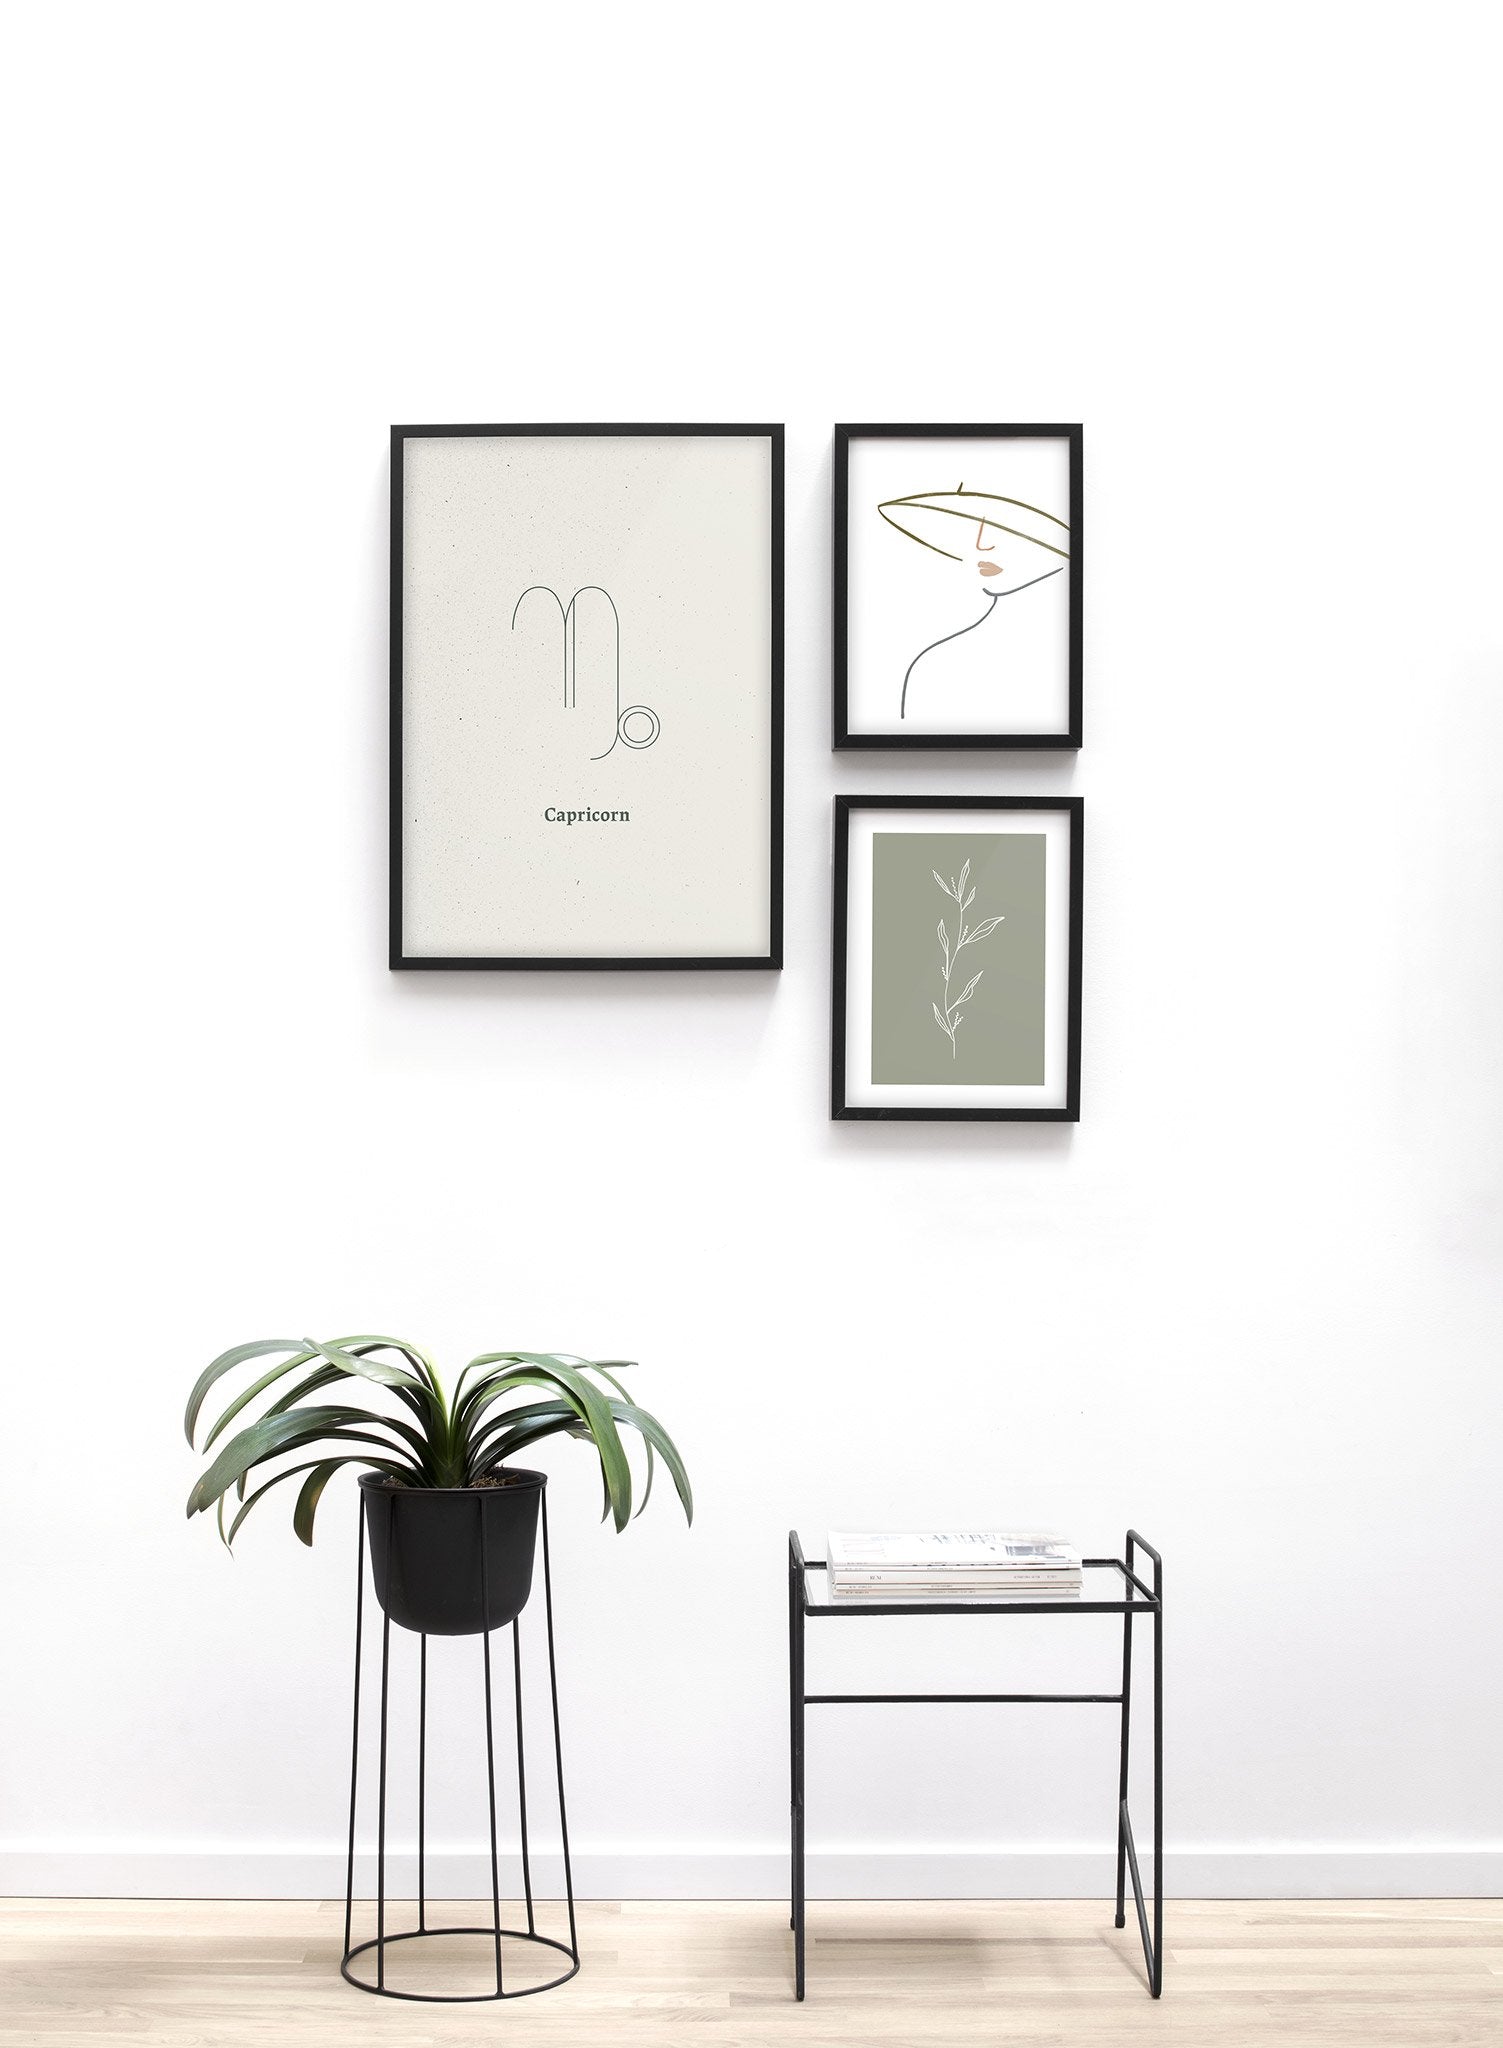 Minimalist celestial illustration poster by Opposite Wall with Capricorn symbol - Lifestyle Trio - Entryway